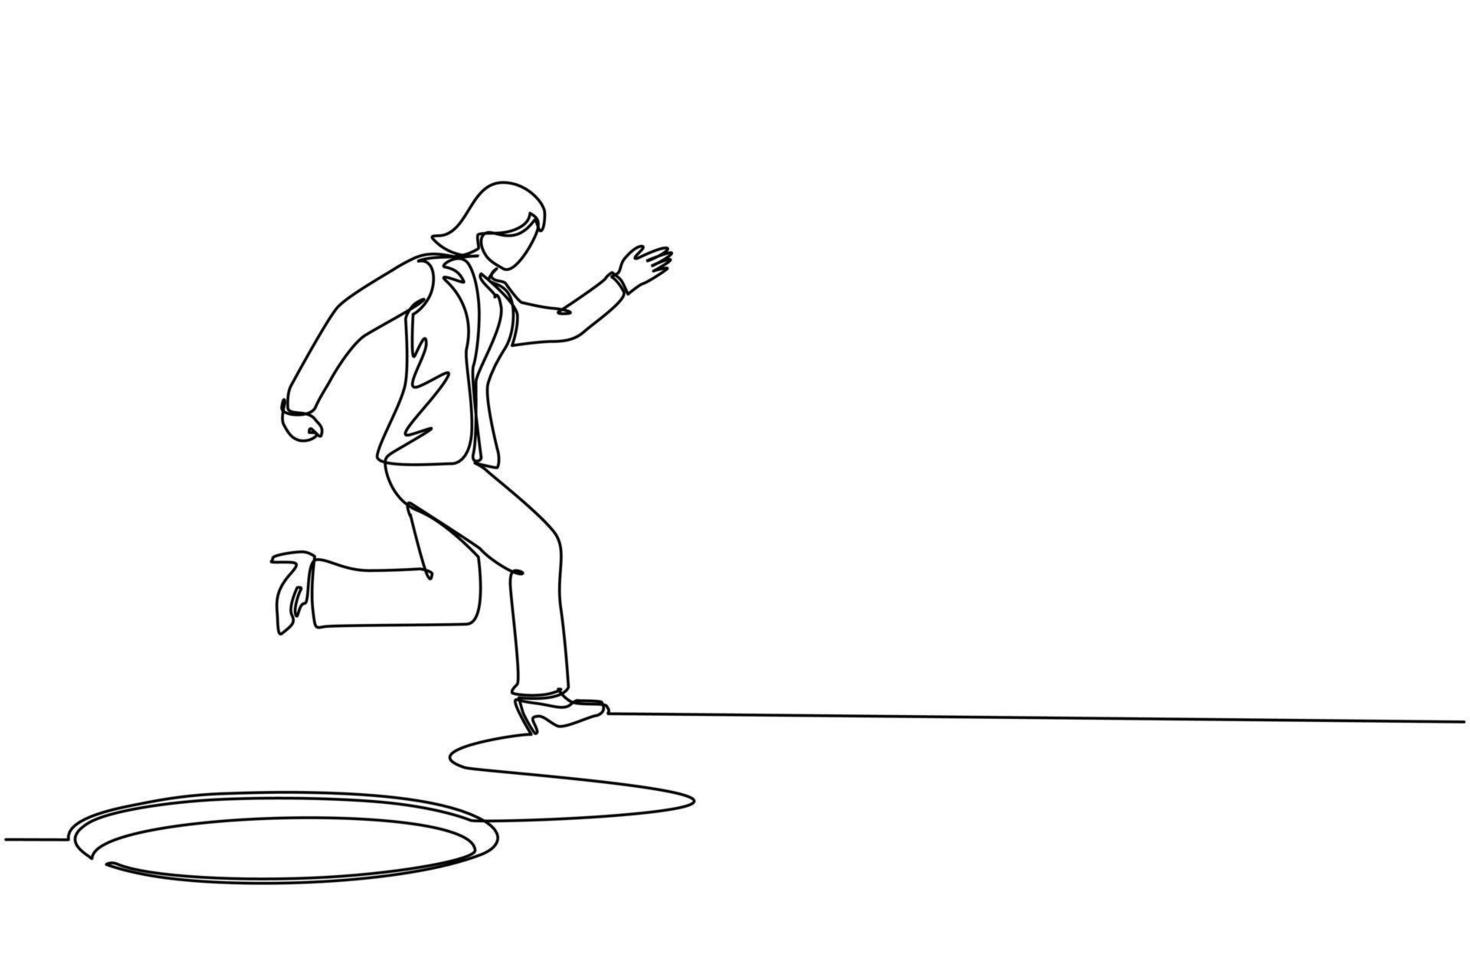 Single continuous line drawing businesswoman jumping through the hole, metaphor to facing big problem. Business struggles. Strength for success. Dynamic one line graphic design vector illustration